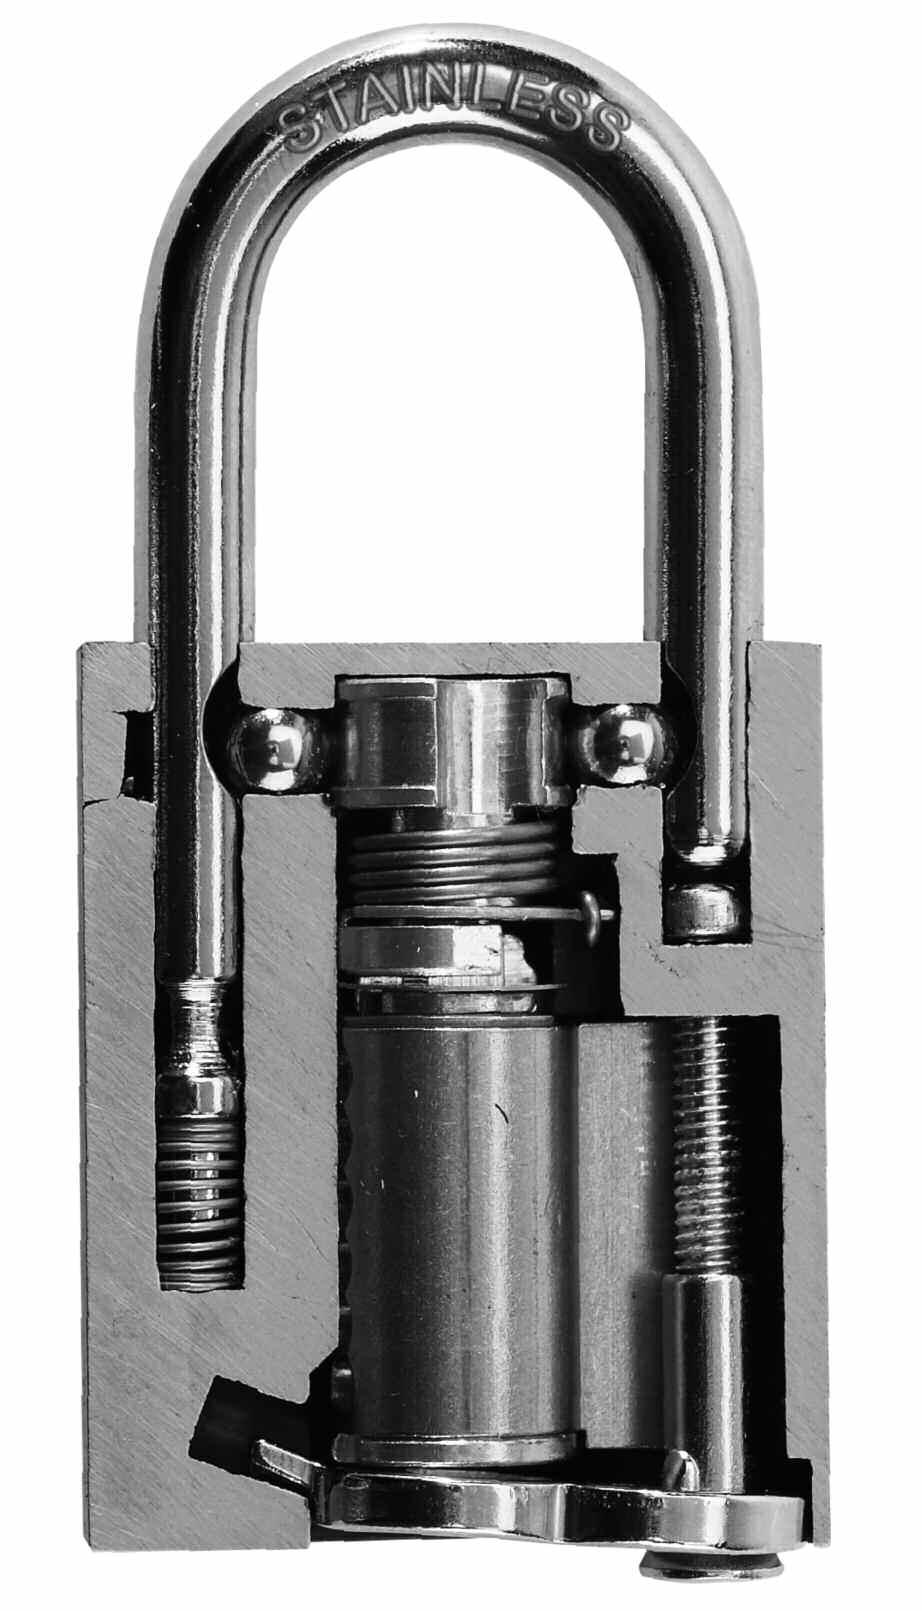 American Lock Stainless Steel Series A5400 & A6400 Disassembly Unlock shackle Use a Phillips screwdriver to remove security screw Remove security nut and trap door Remove cylinder and anti-bypass